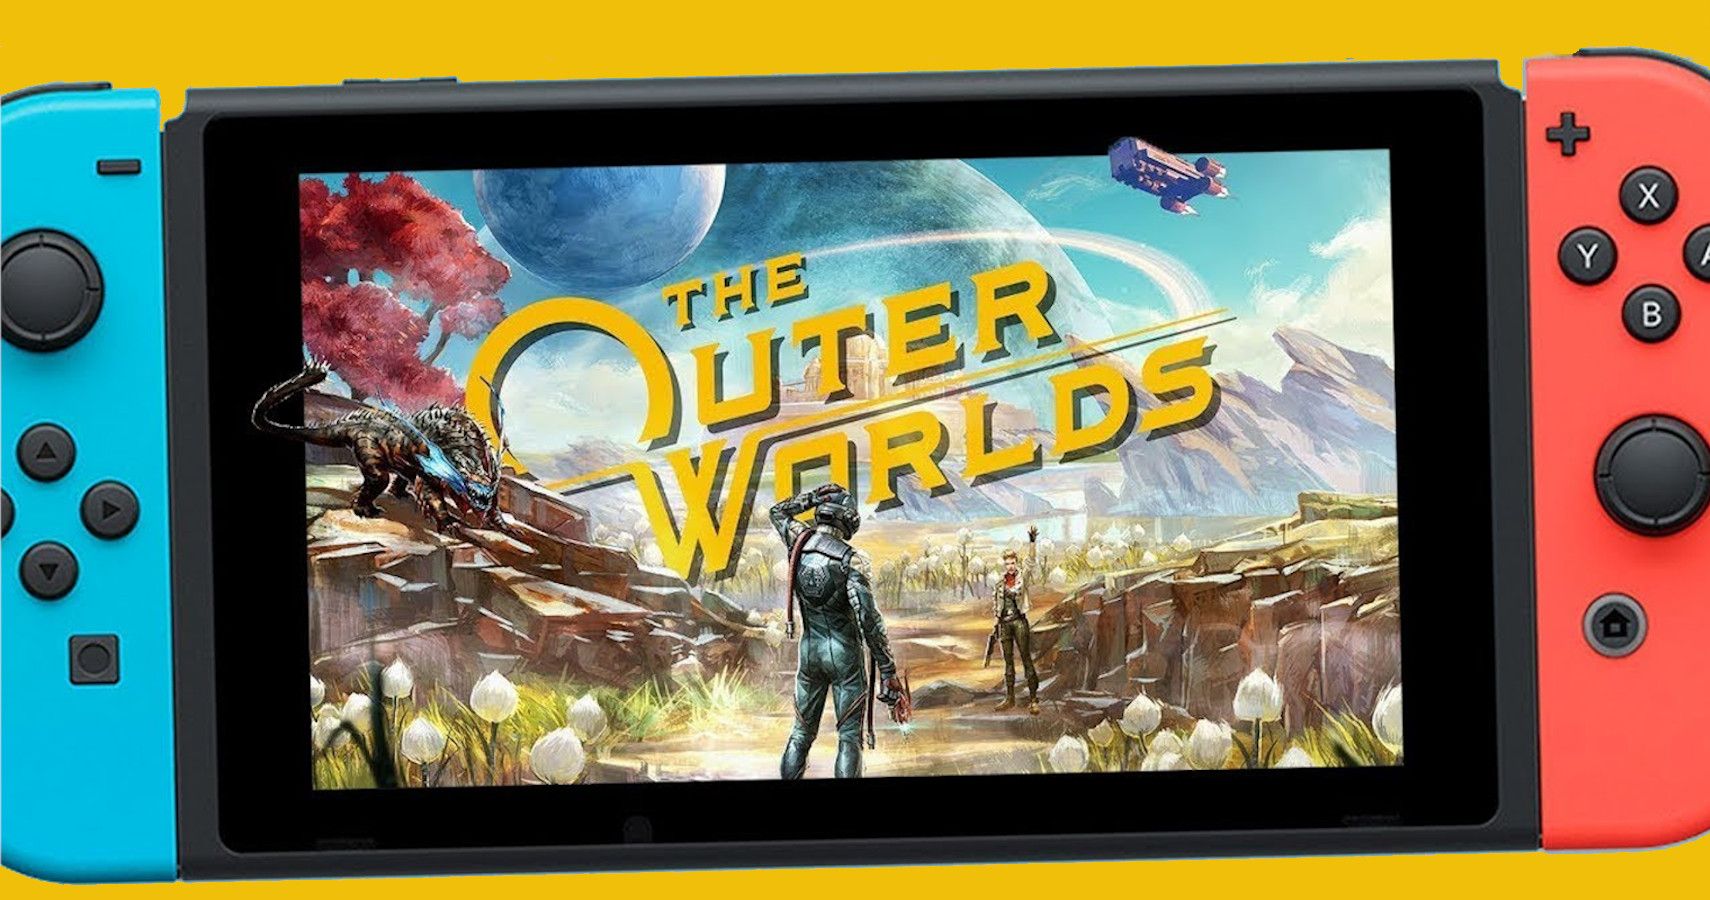 The Outer Worlds For The Nintendo Switch Releases By March 2020